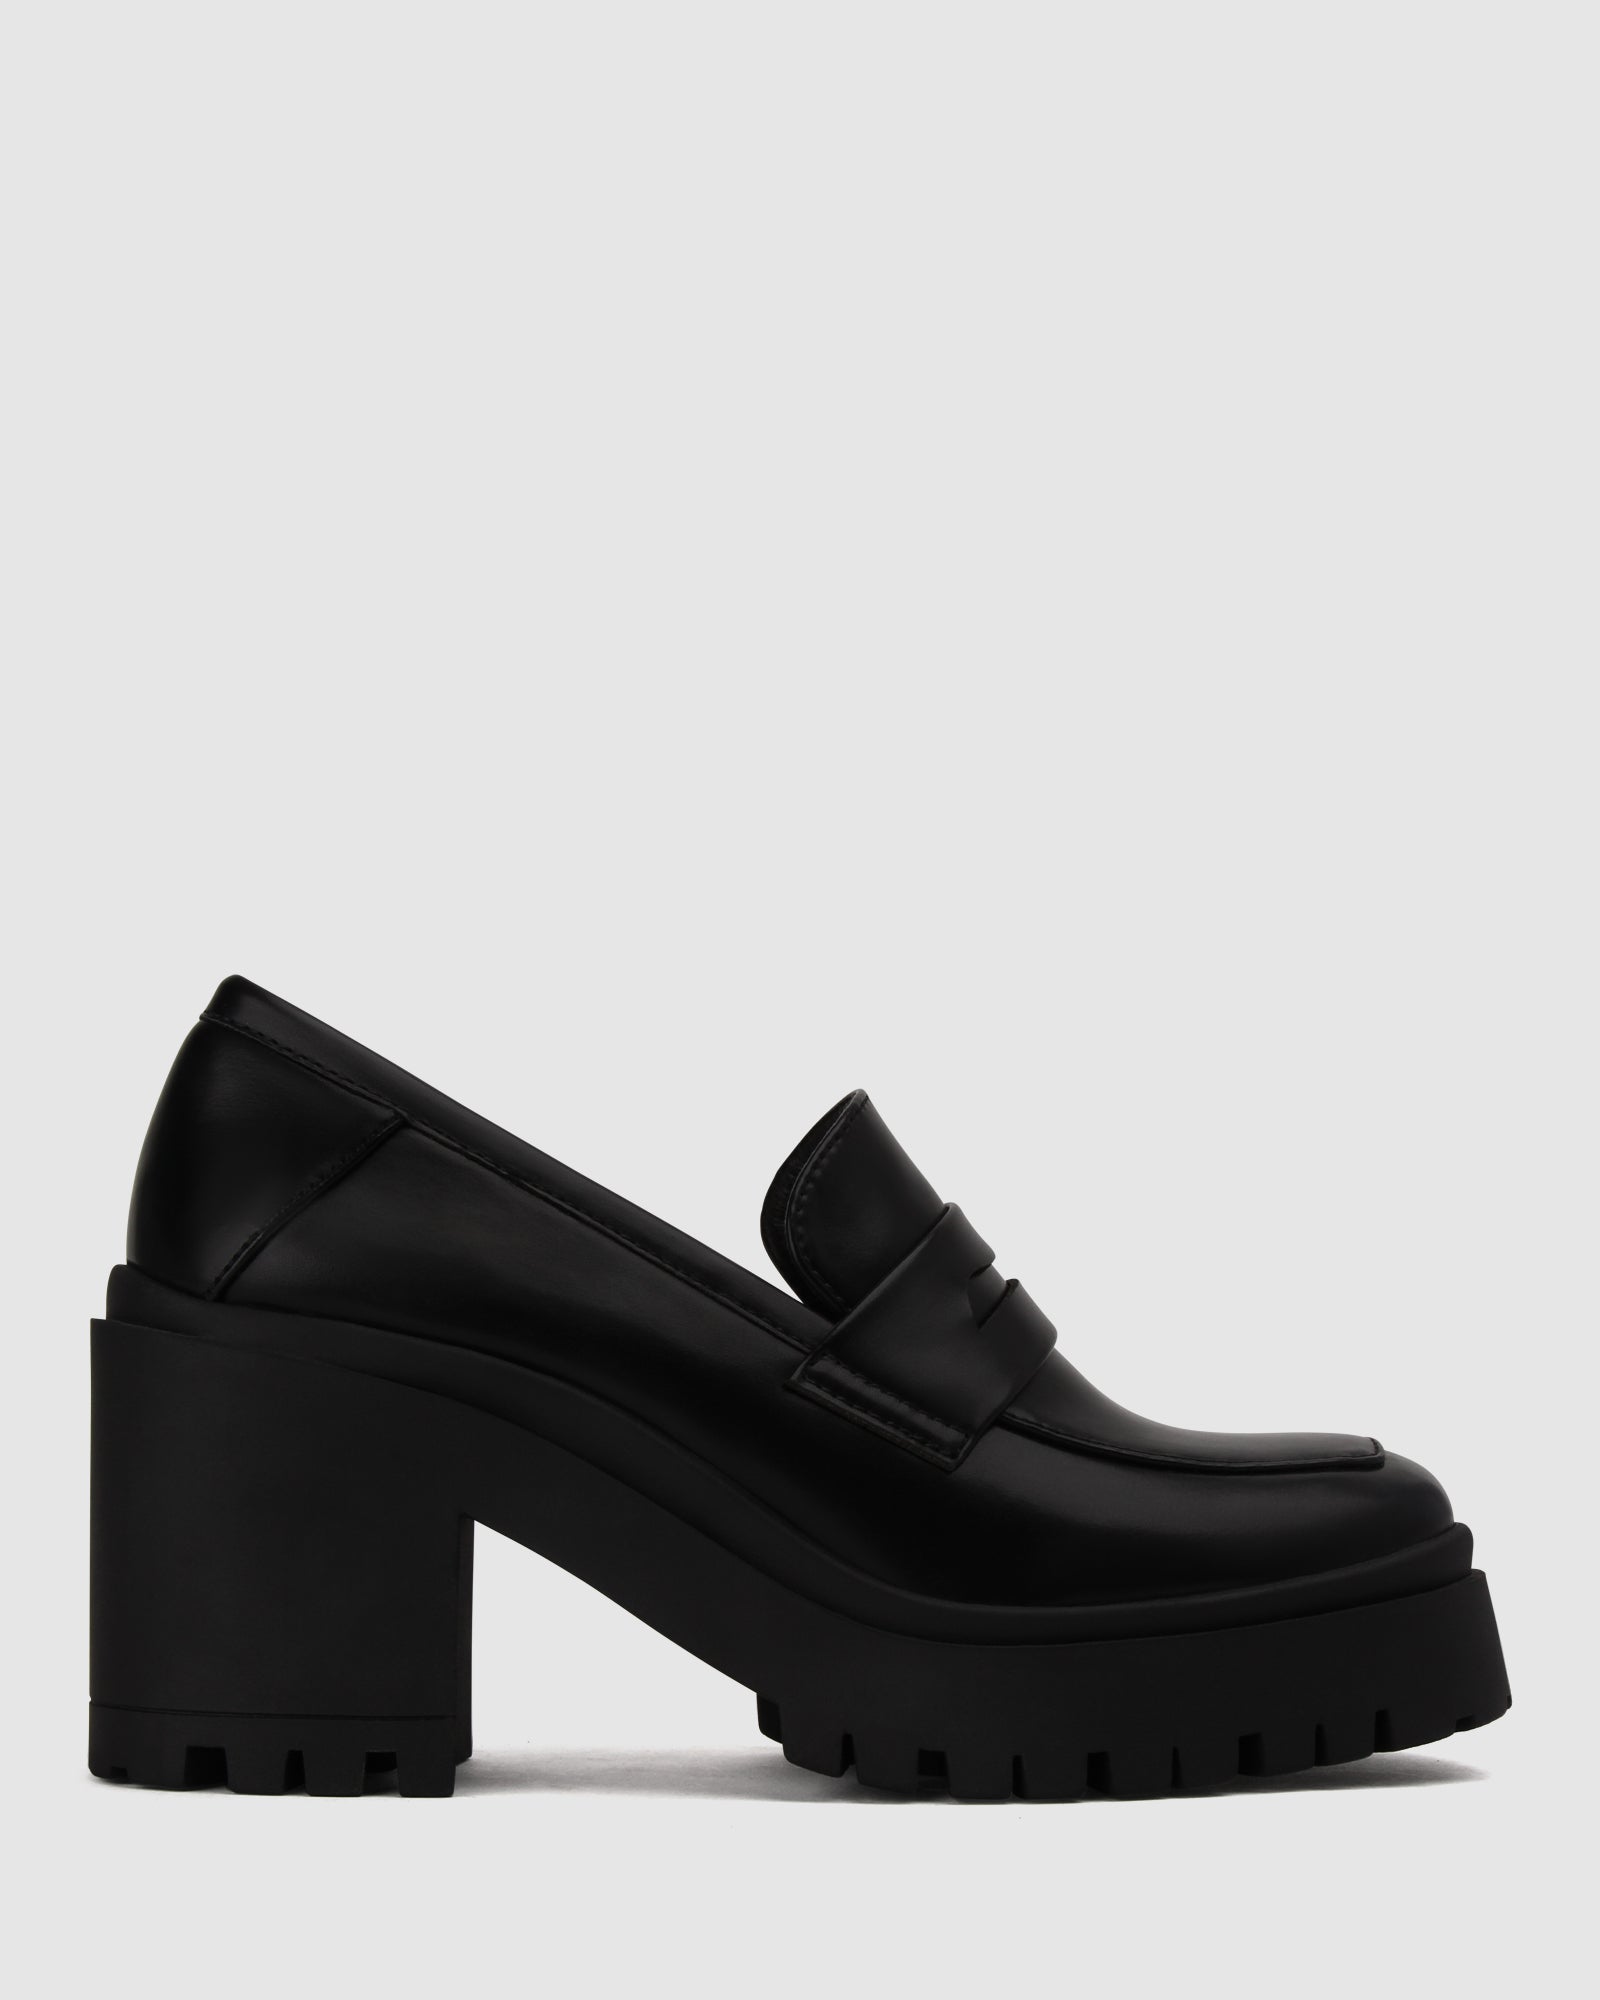 Buy DARVEY Square Toe Heeled Loafers by Betts online - Betts